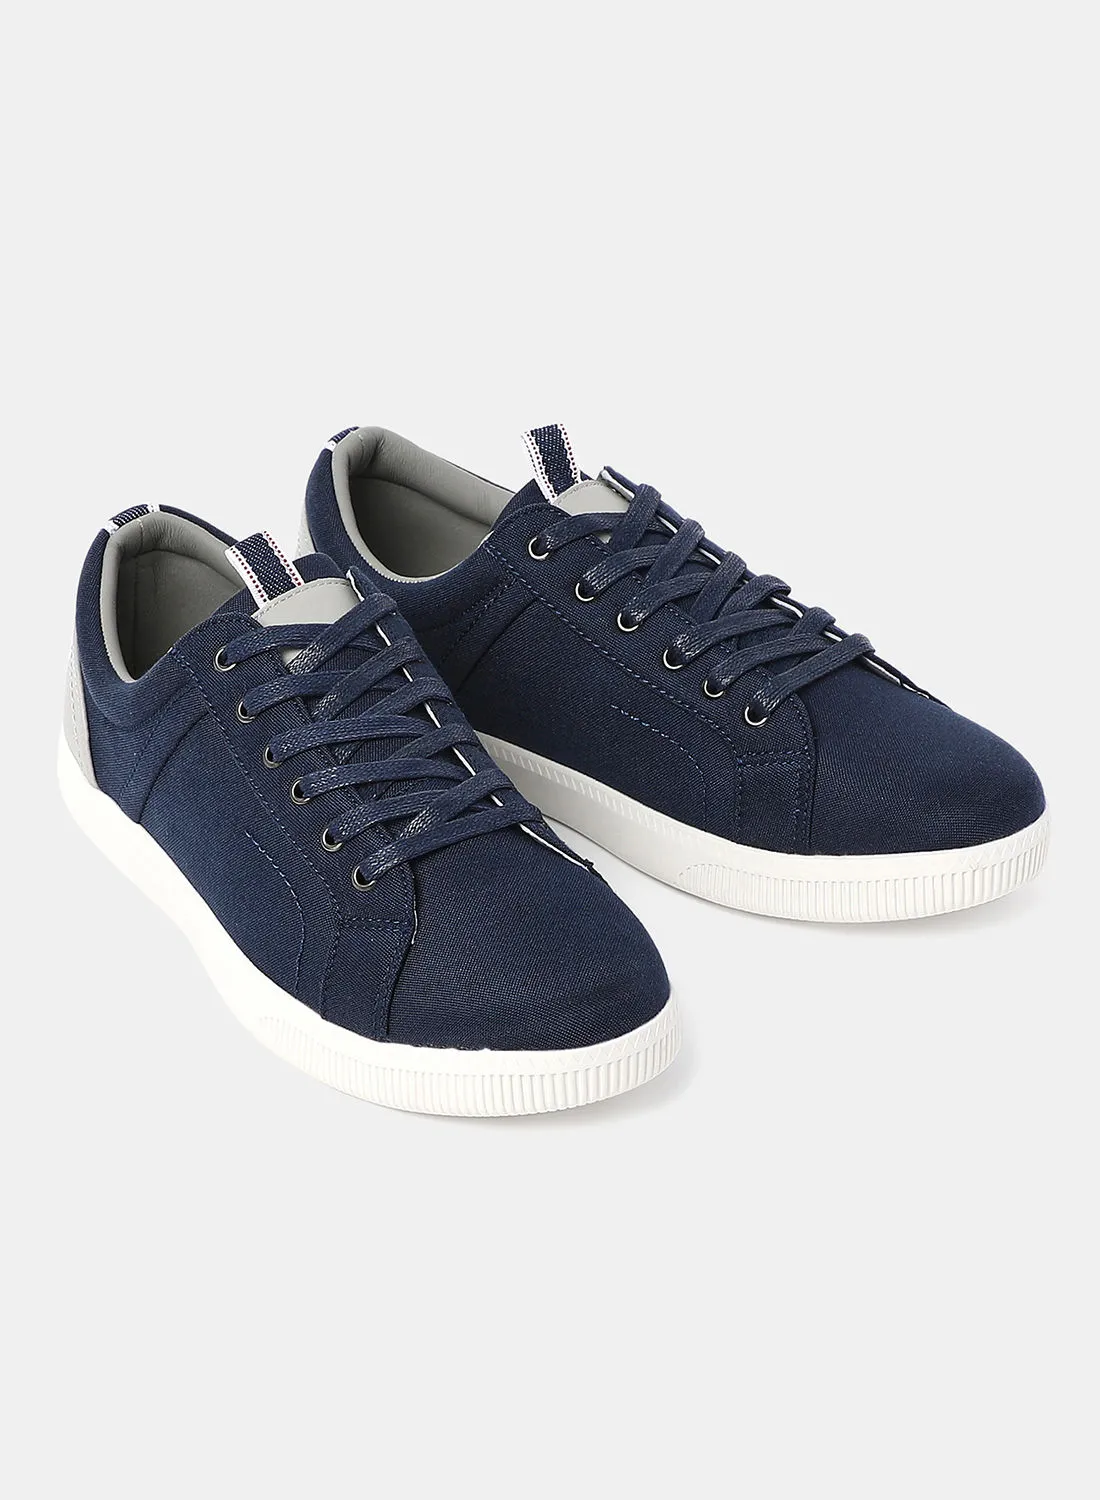 Athletiq Low Top Sneakers Blue/Grey